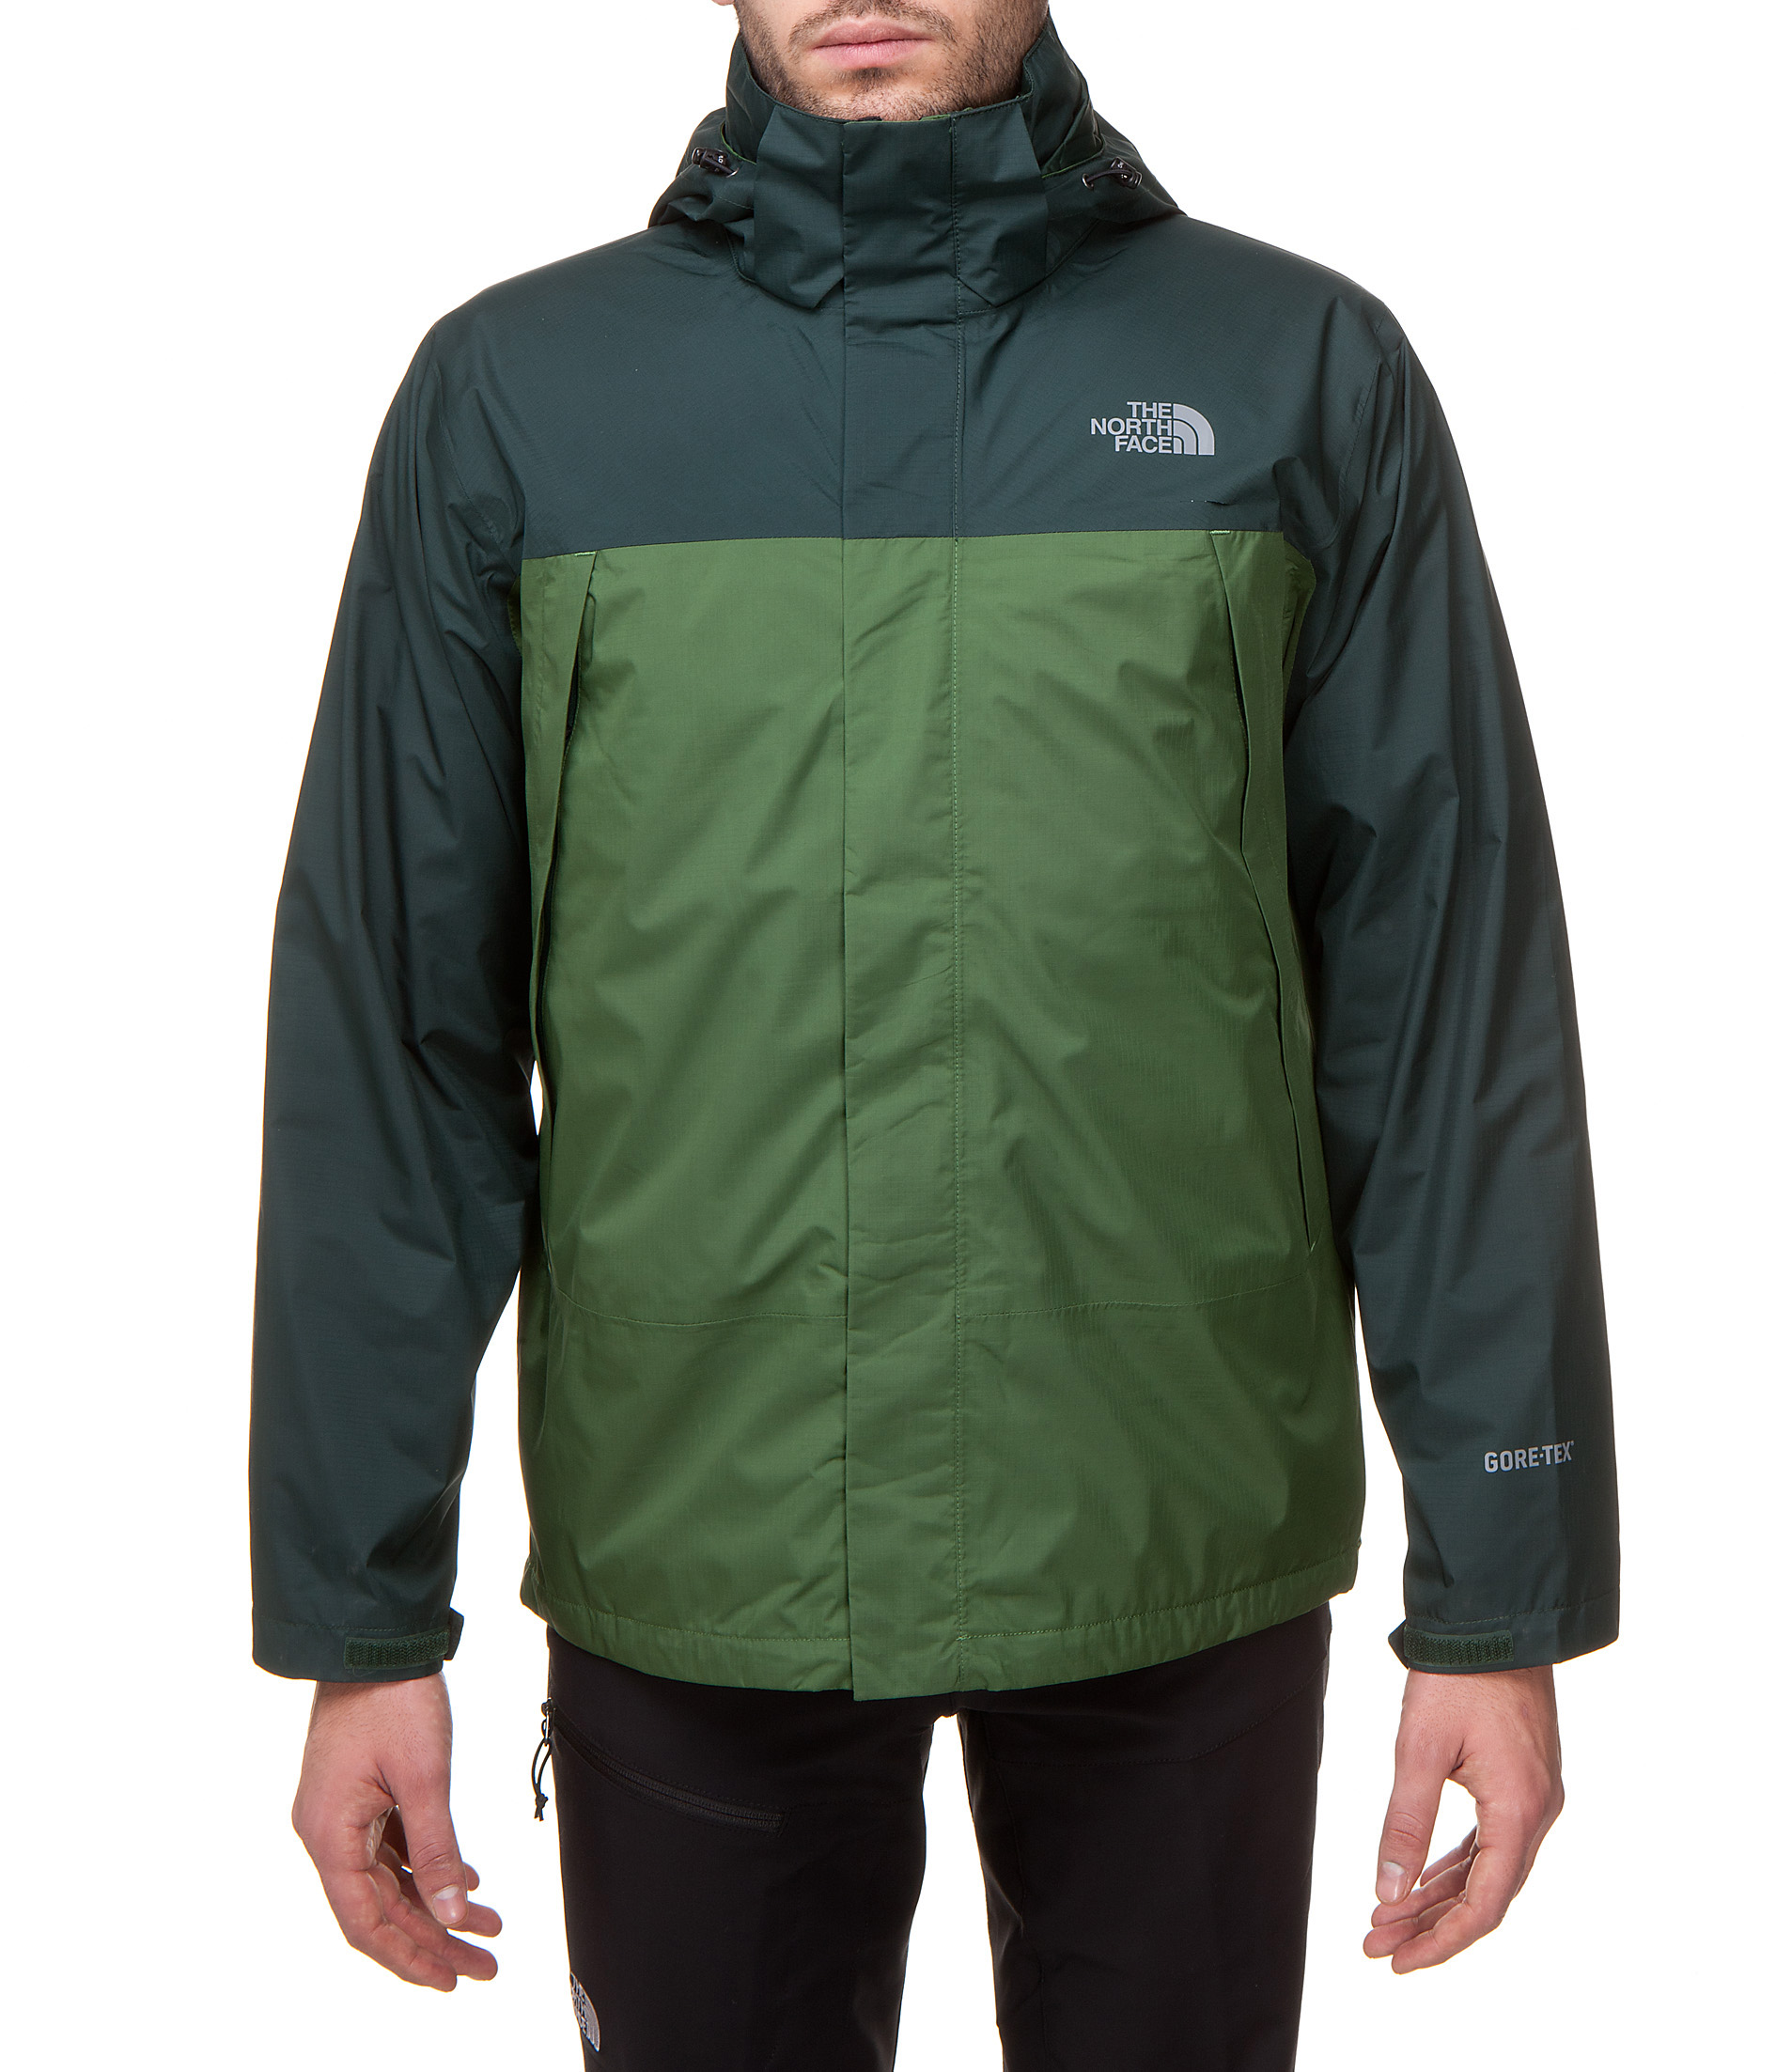 Foto The North Face Men's Mountain Light Triclimate™ Jacket foto 200292